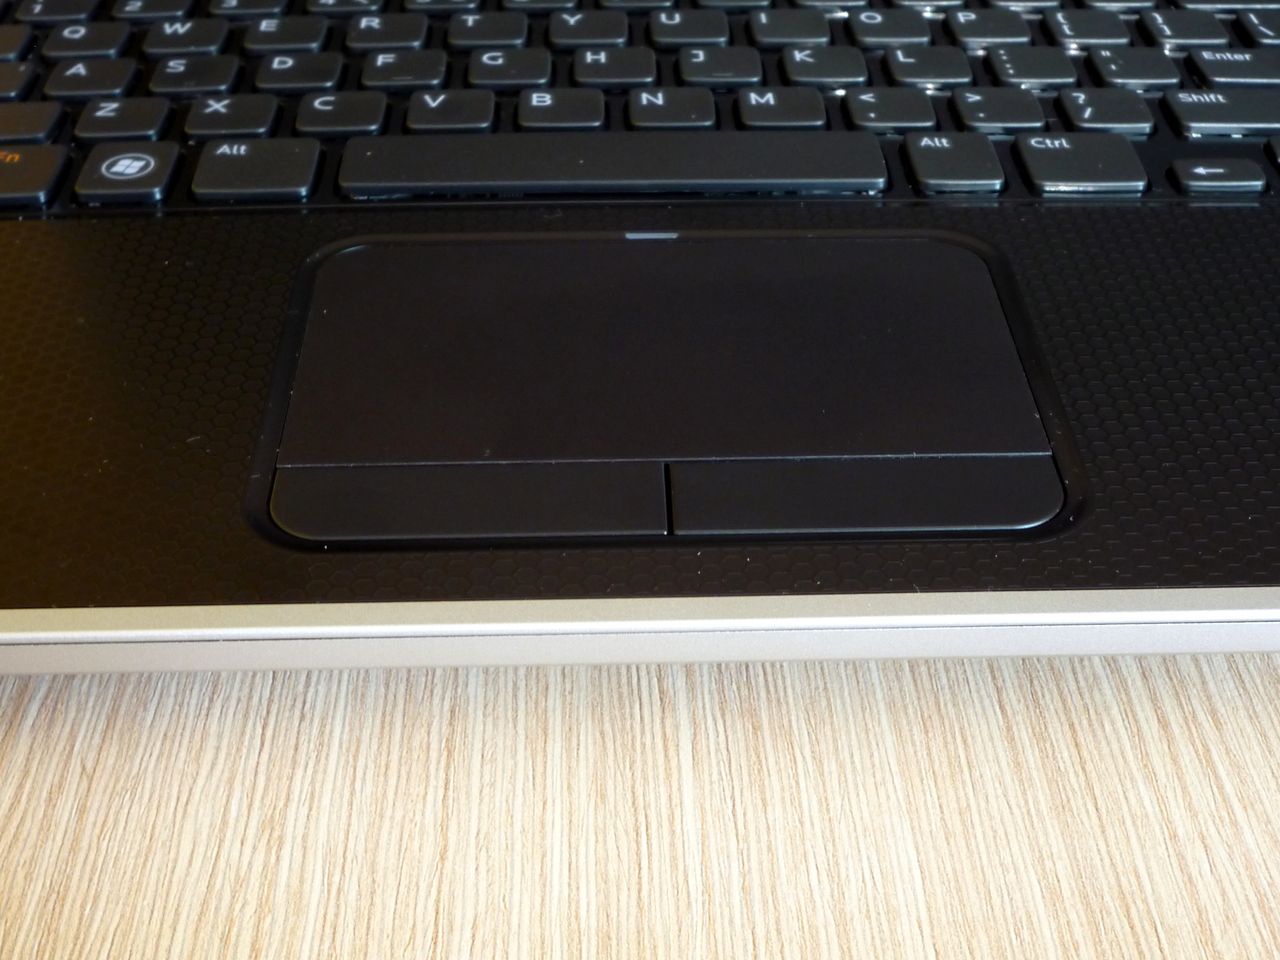 Dell Inspiron 17R Special Edition (7720) - touchpad